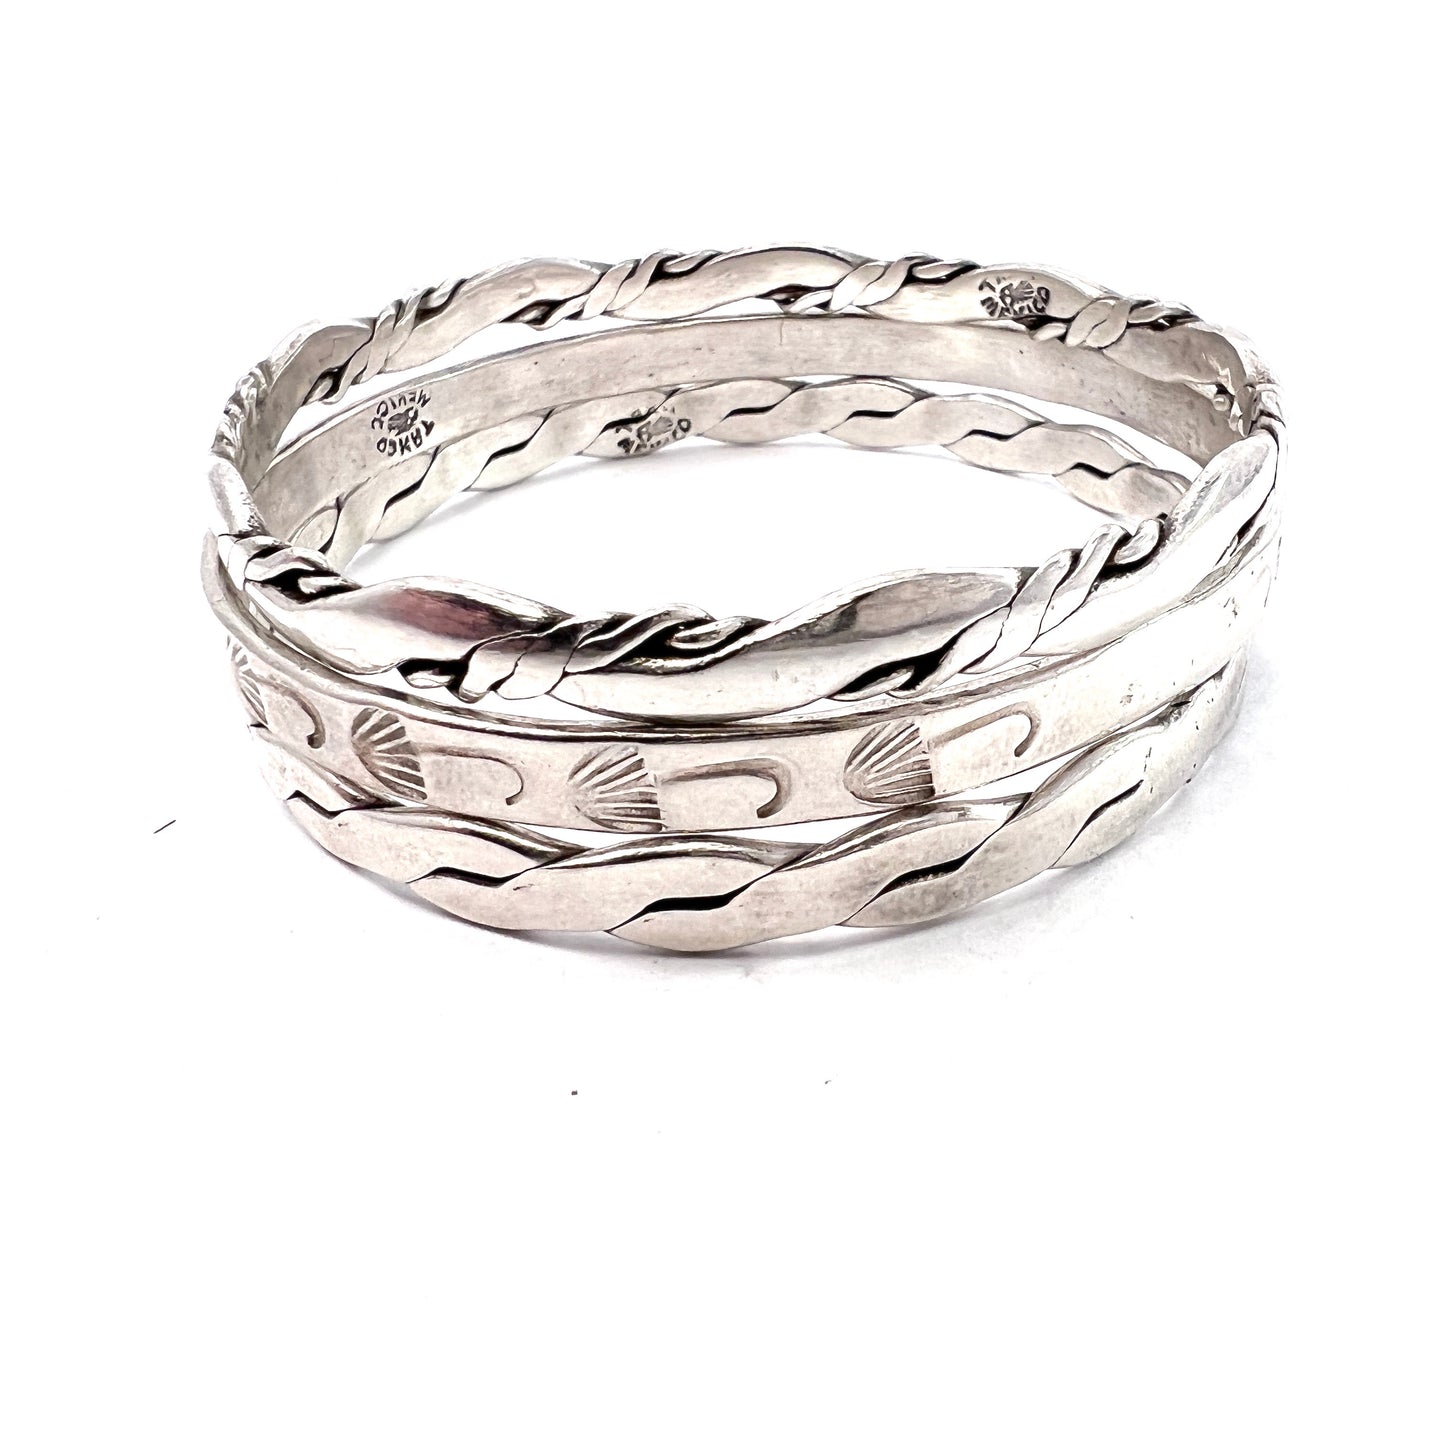 Taxco, Mexico. Vintage Sterling Silver Bangle Stack.